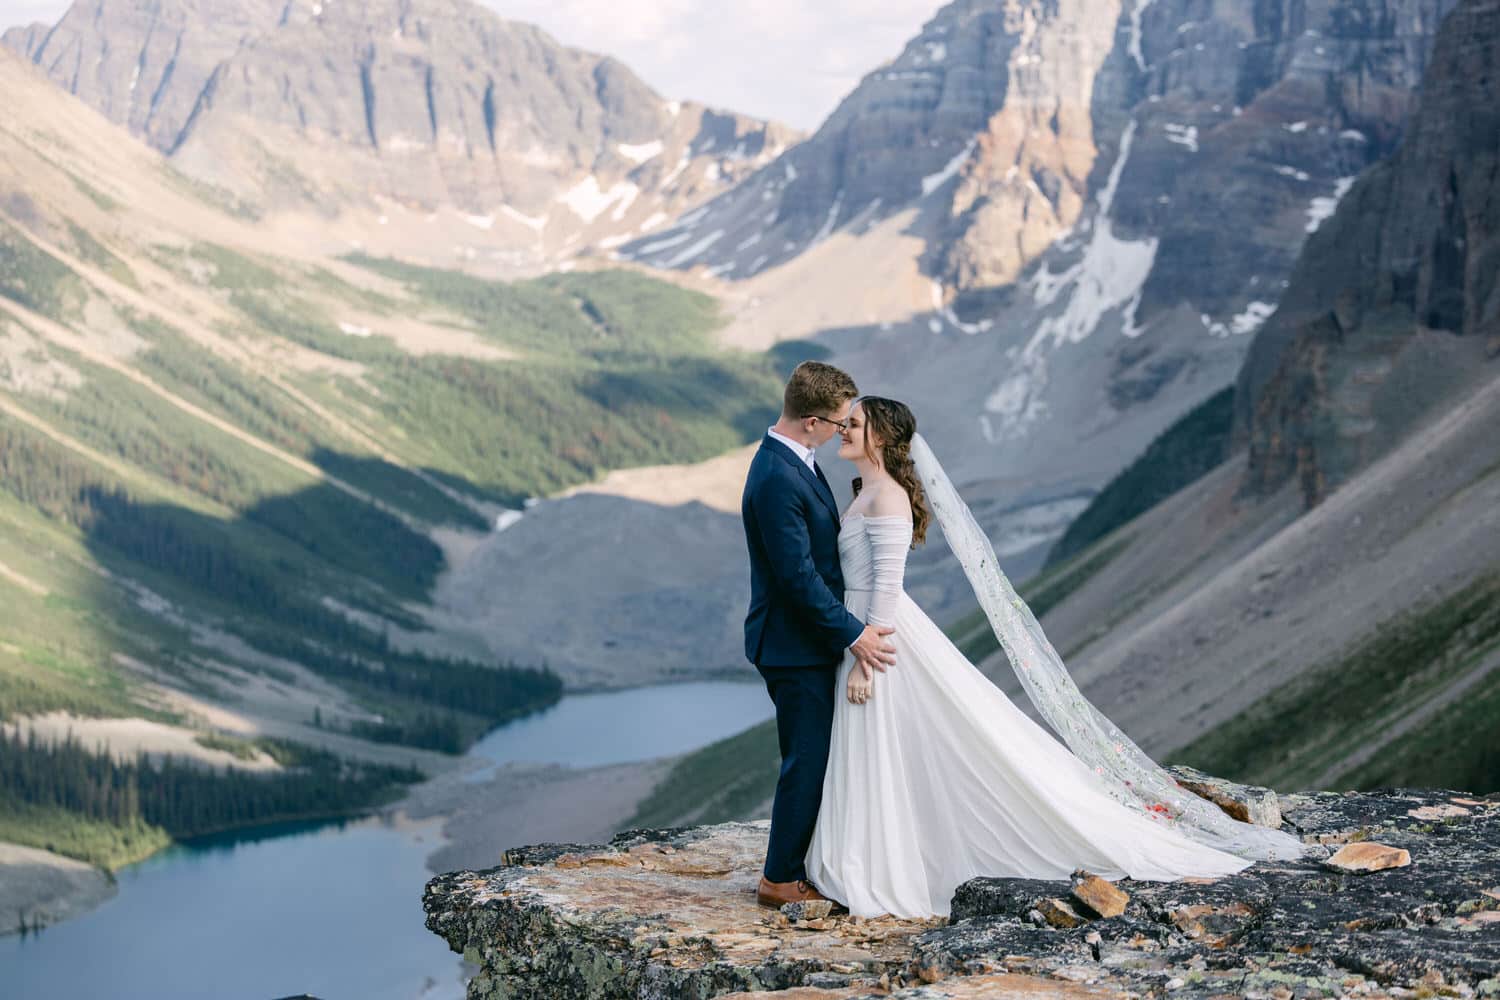 Moraine Lake Wedding photographer captureing a moment between bride and groom holding each other